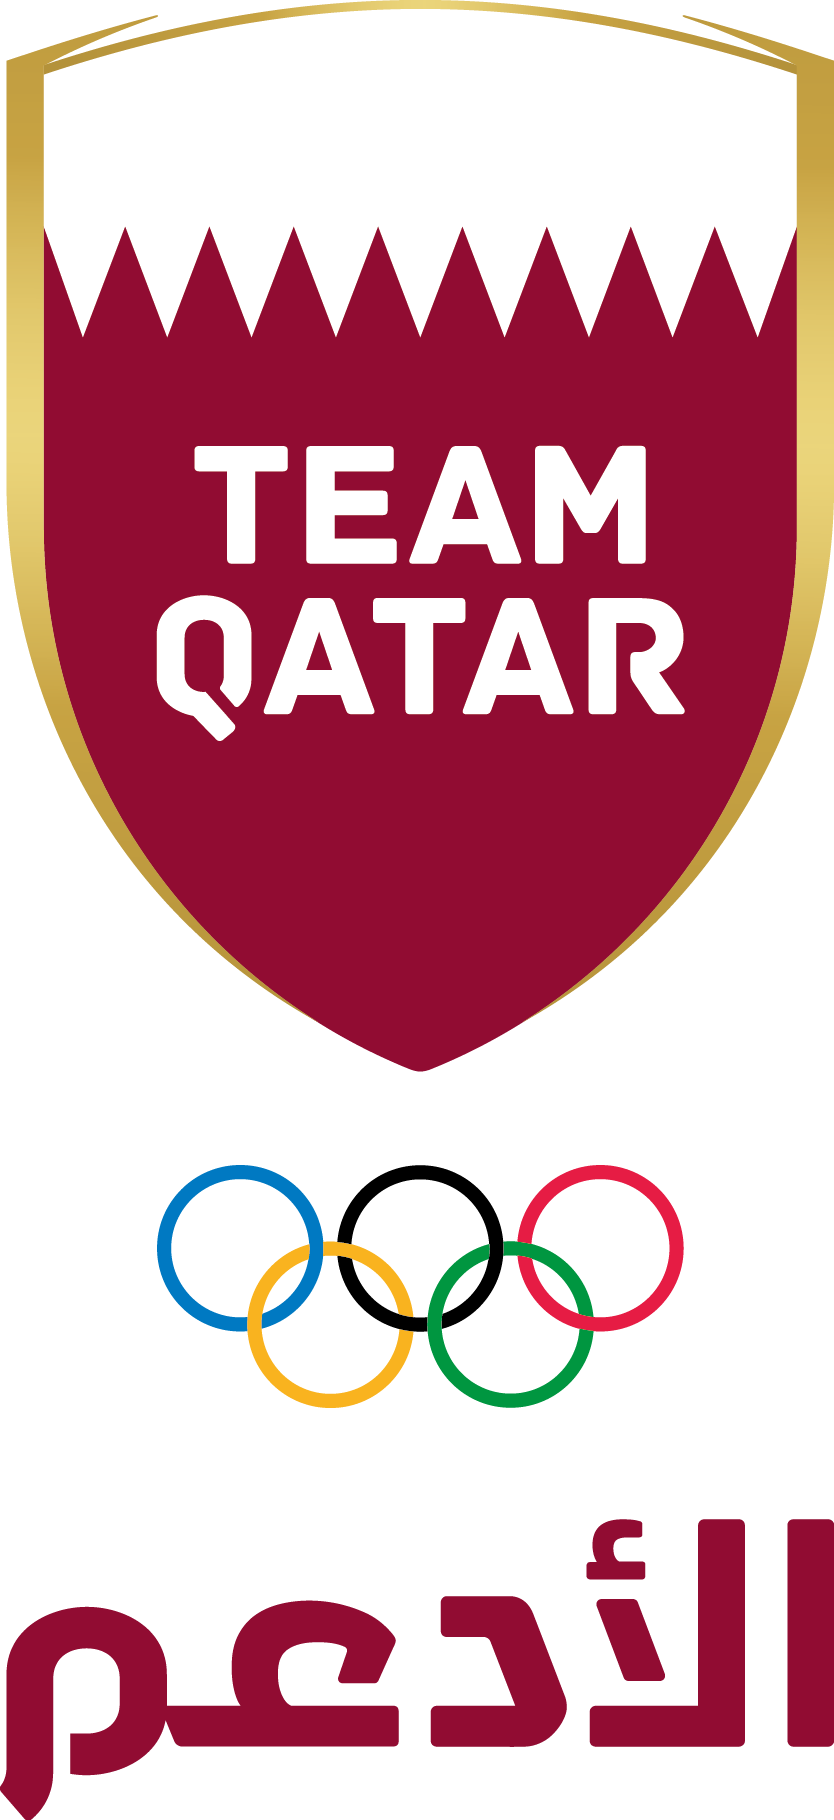 A new brand and strategy, including an updated logo, has been unveiled by the Qatar Olympic Committee ©QOC